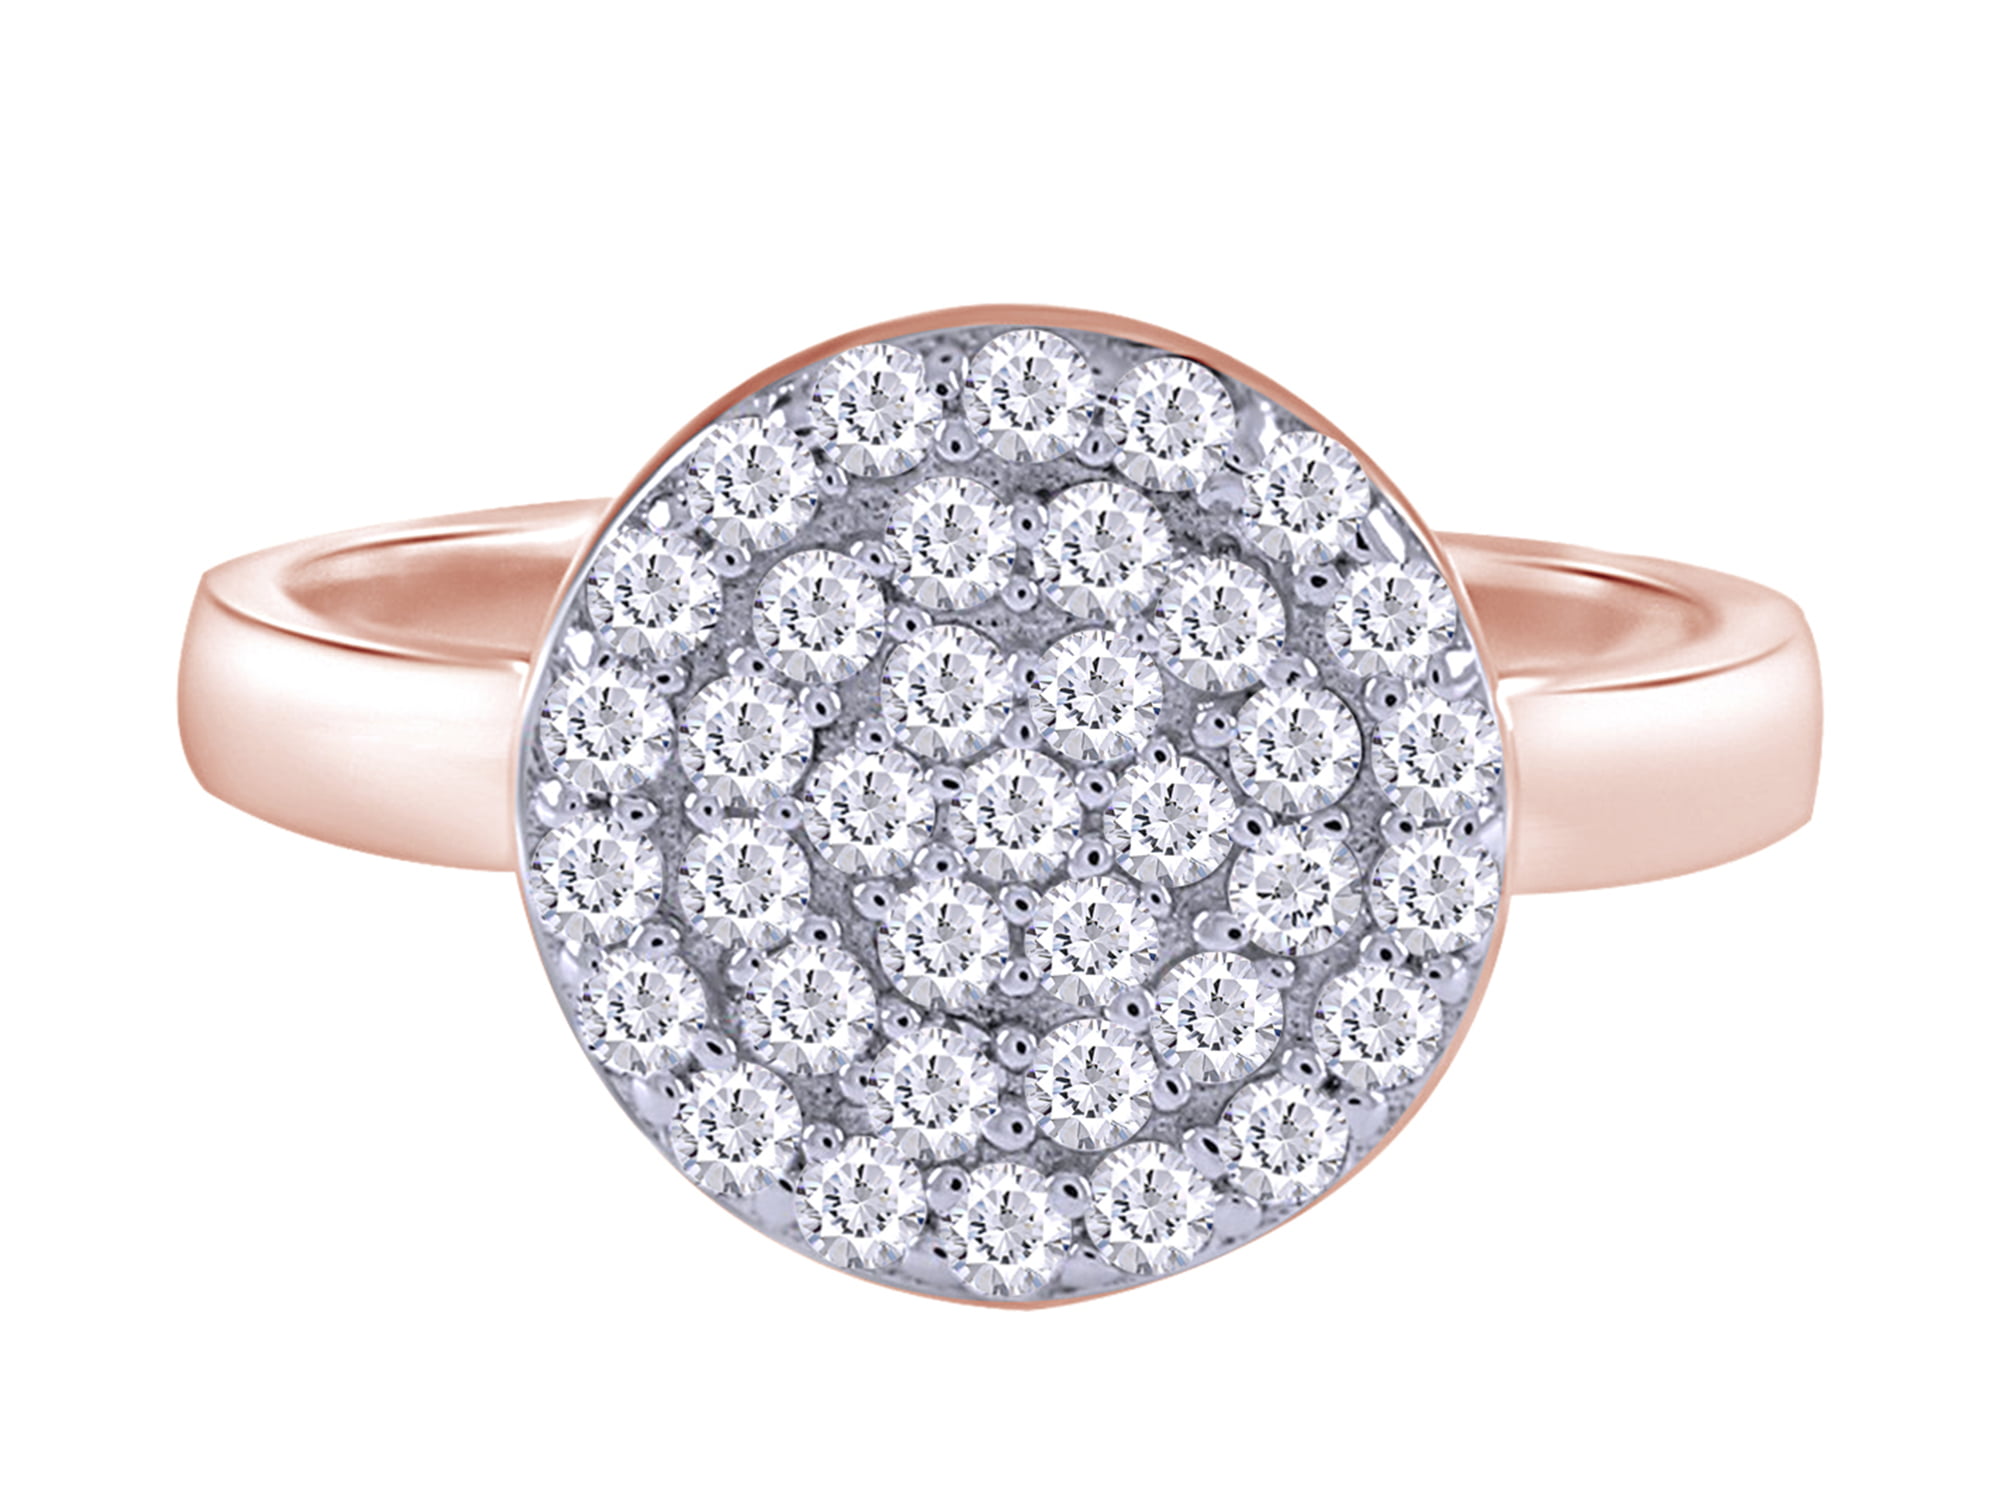 Wishrocks Round Cut White Cubic Zirconia Cluster Ring in 14K Rose Gold Over Sterling Silver